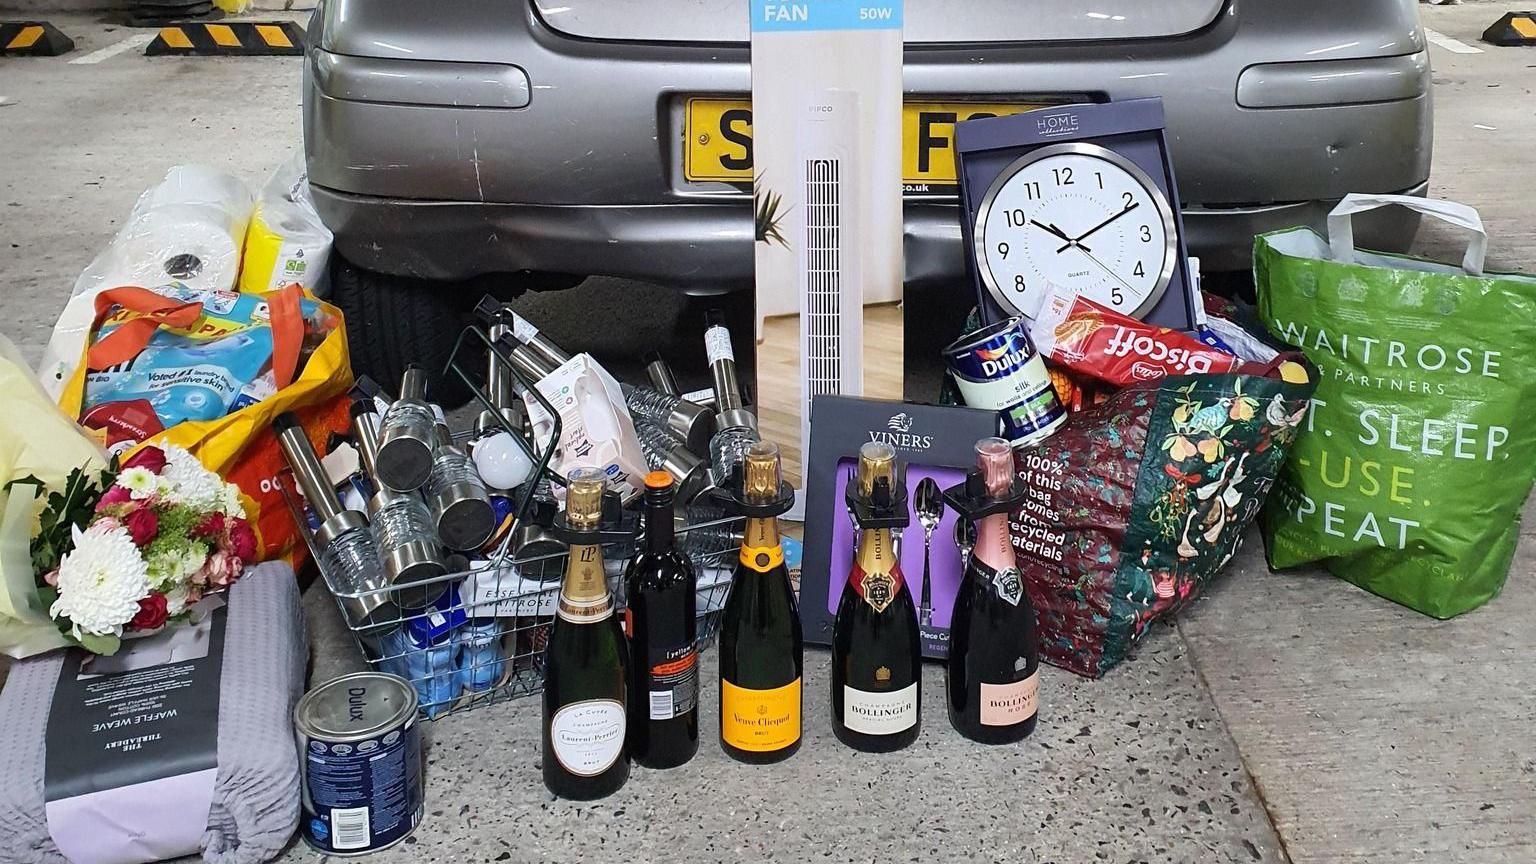 Flowers, paint and sparling wine are all among the items shown next to the car